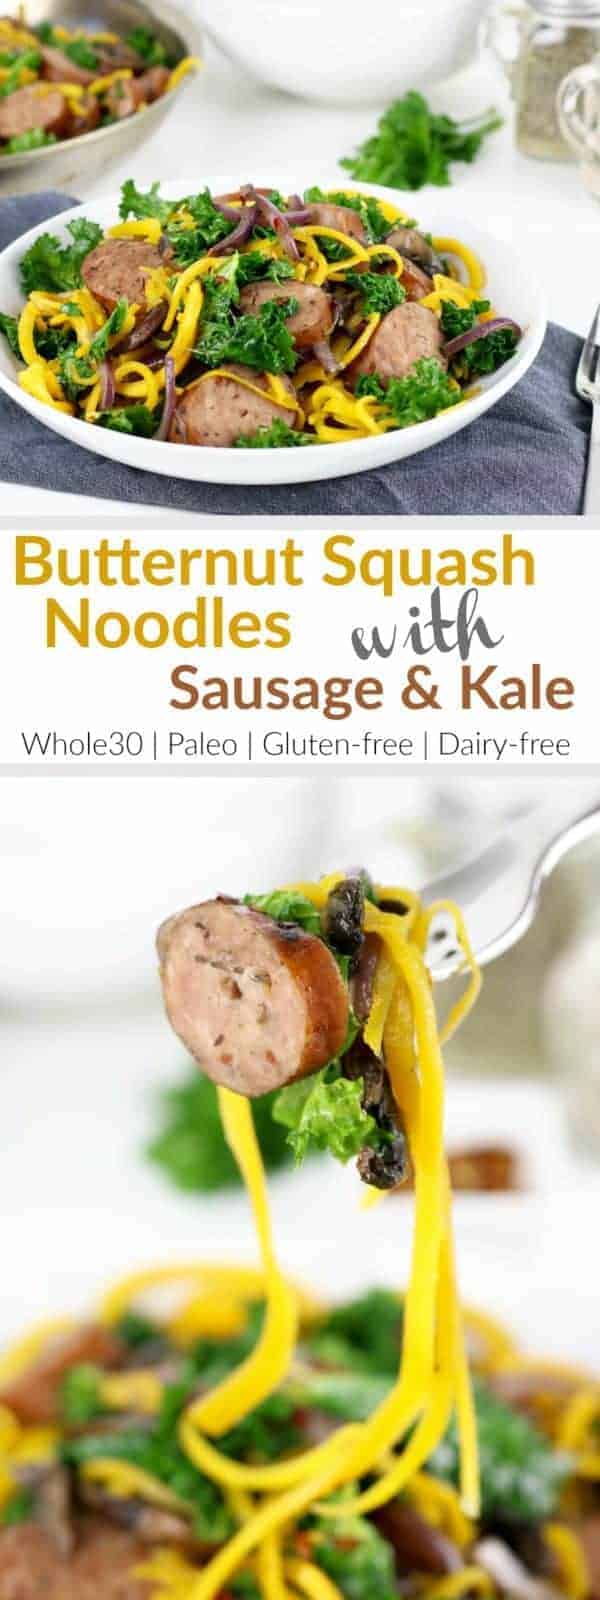 We’re about to steal your comfort food-loving heart with these one-dish Butternut Squash Noodles with Sausage and Kale | Whole30 | Paleo | Gluten-free | Grain-free | therealfoodrds.com